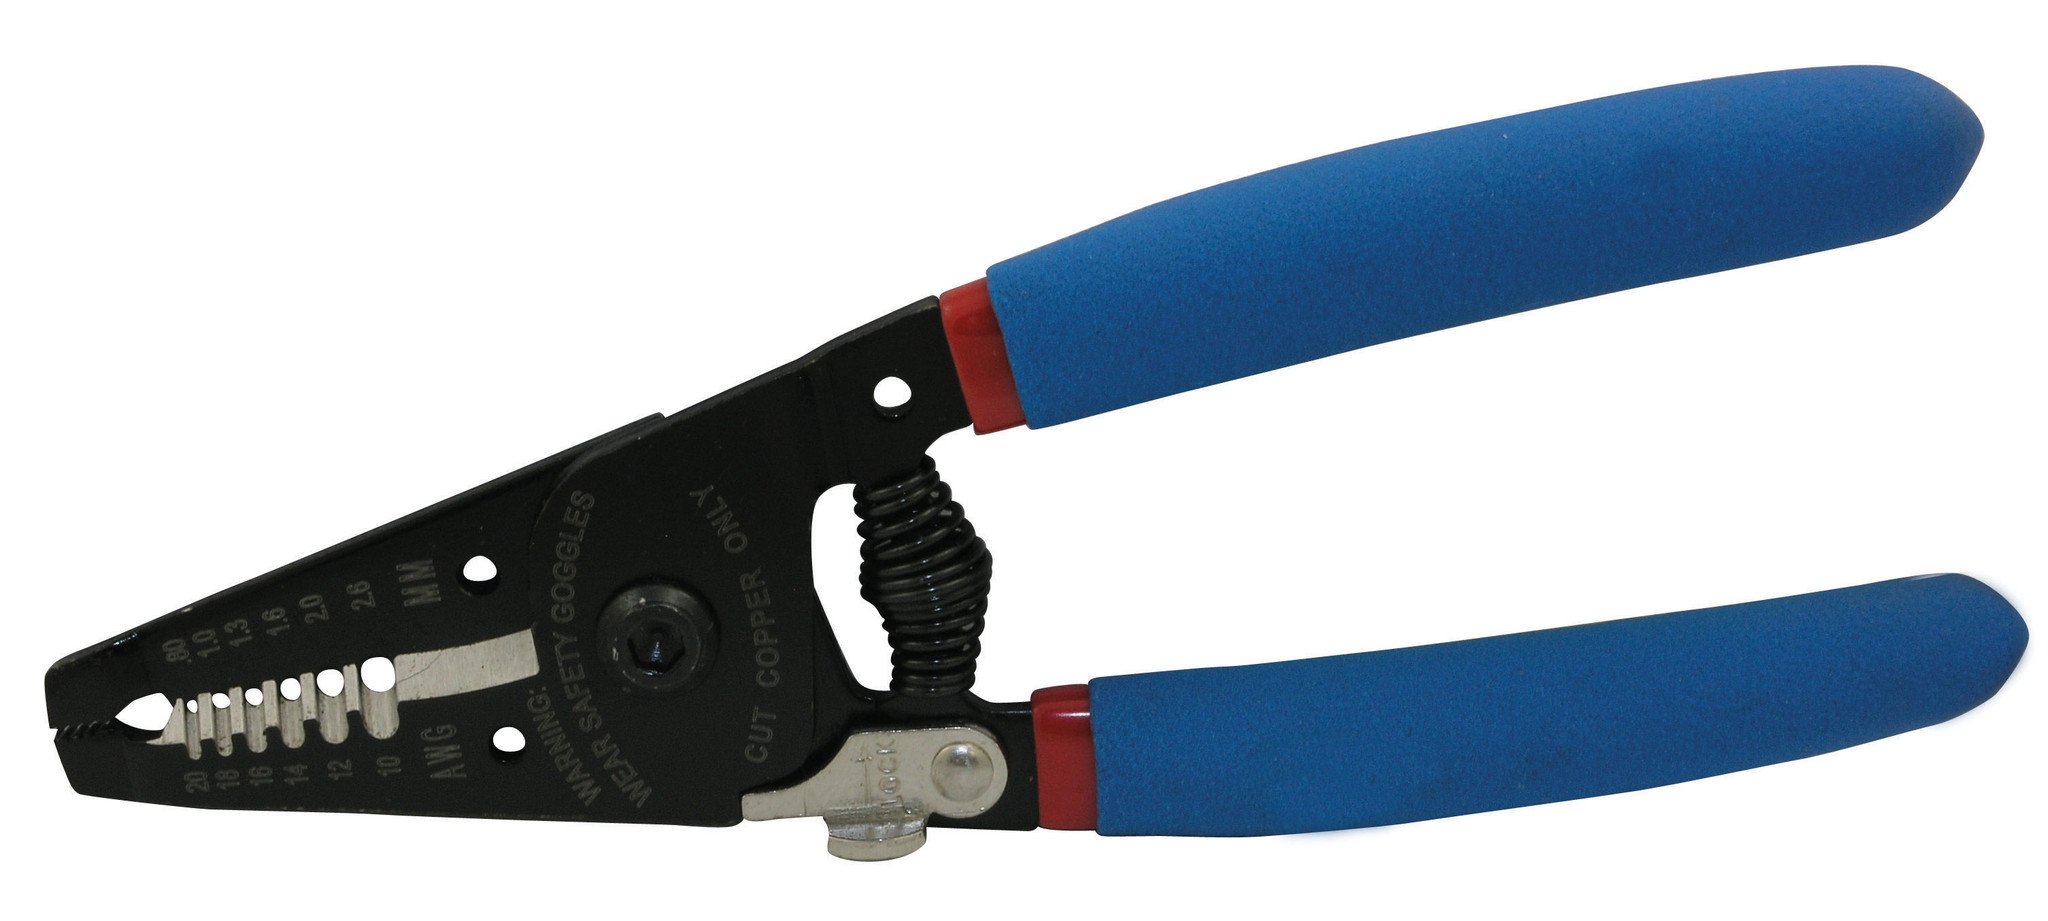 Jet Spring Loaded Wire Stripper/Cutter - 6-1/4" Mechanic Tools - Cleanflow